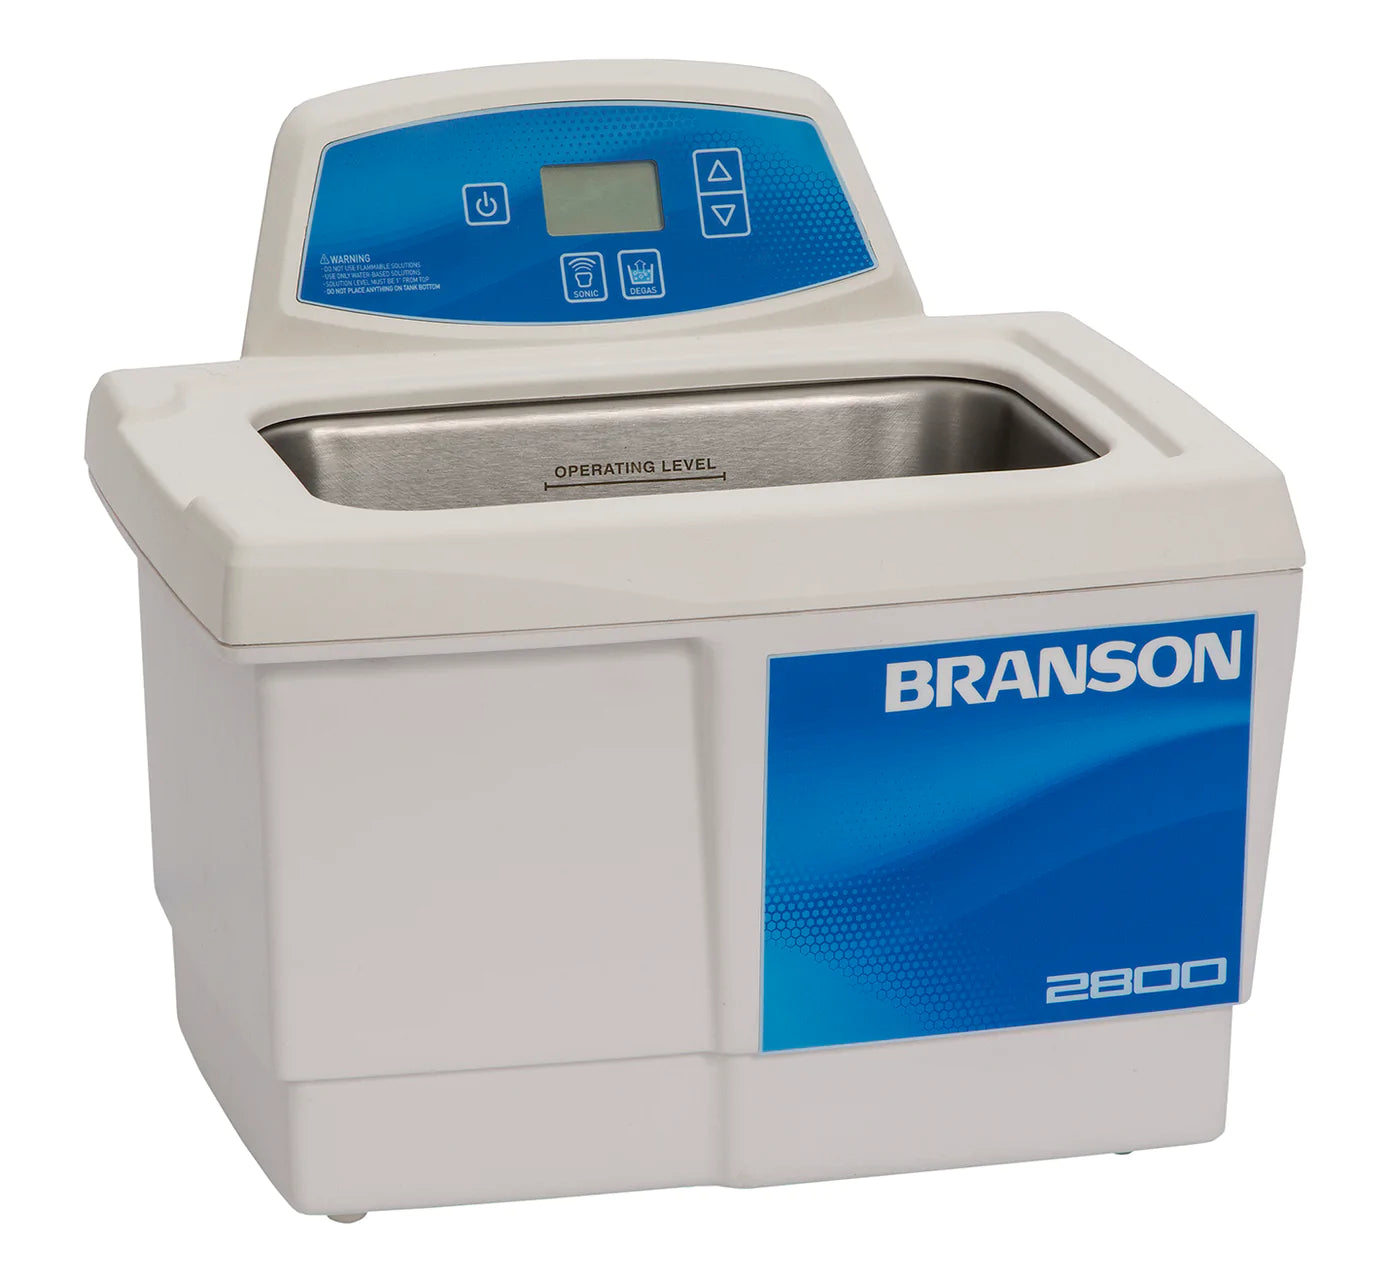 stainless-steel-perforated-tray-for-branson-1500-1800-ultrasonic-cleaners-100-410-160